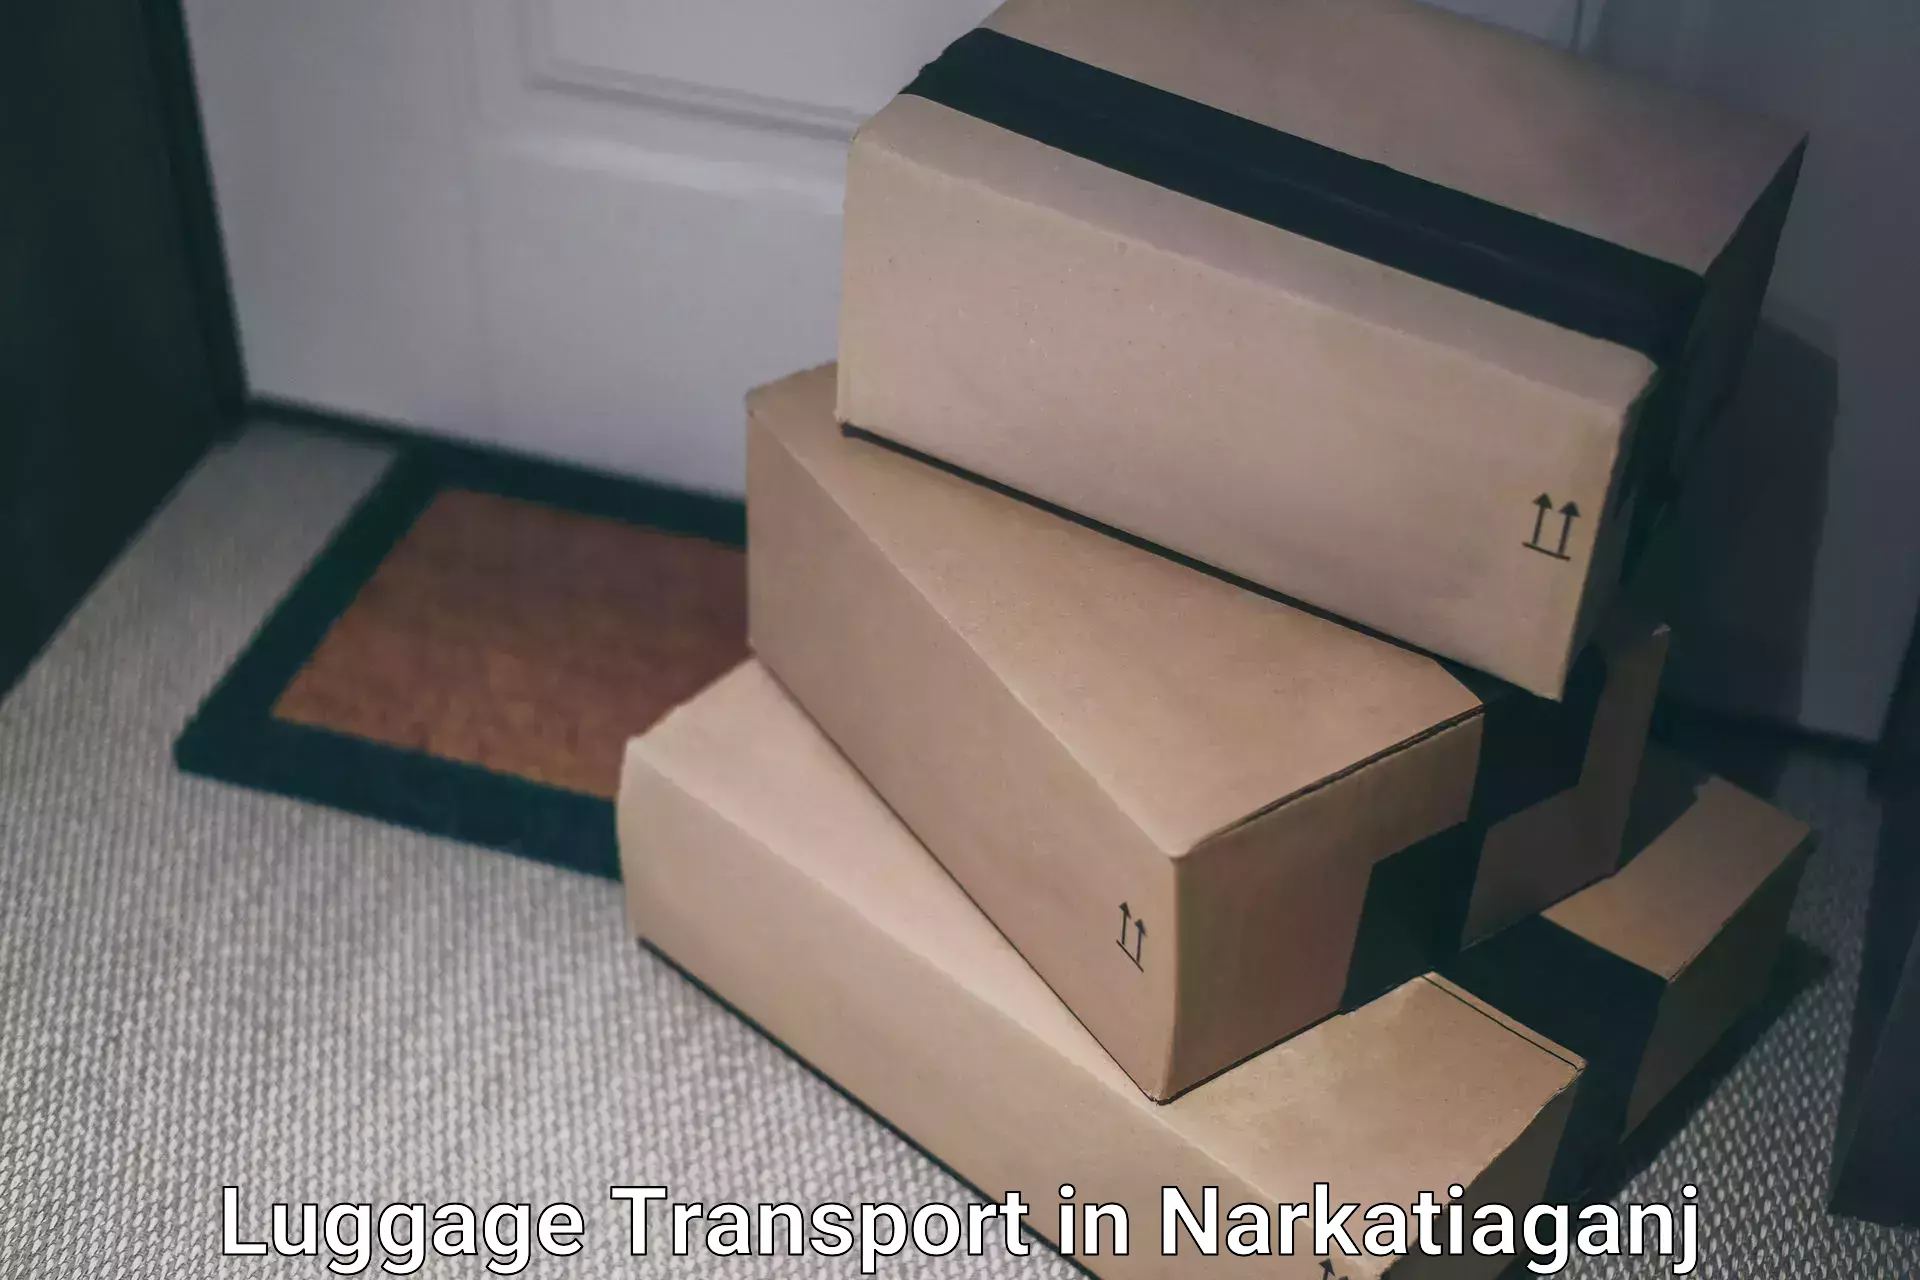 Luggage delivery providers in Narkatiaganj